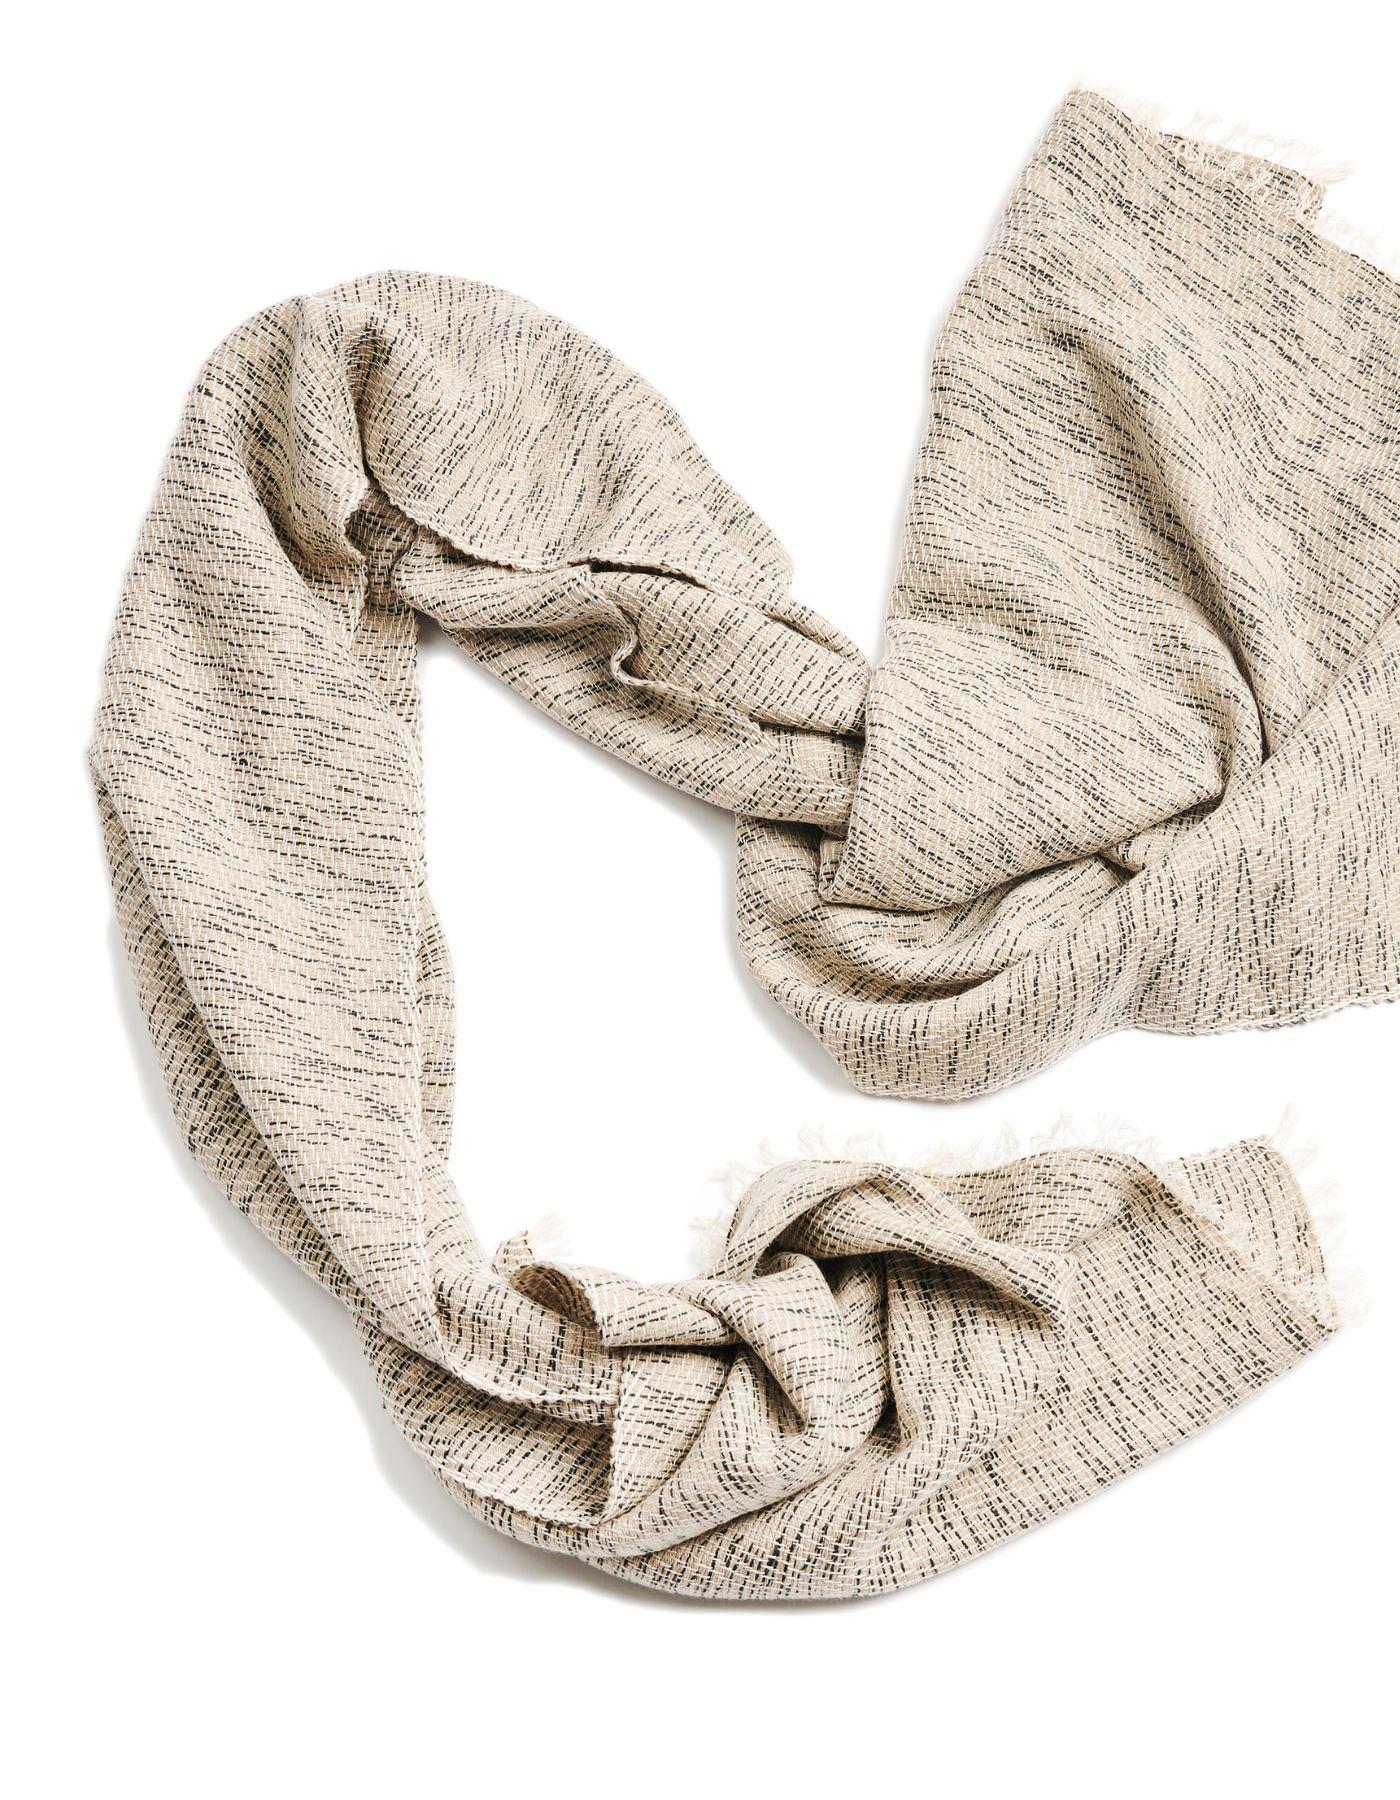 Forest Night Handwoven Soft Cashmere Merino Scarf In Neutral Cream For Sale 8